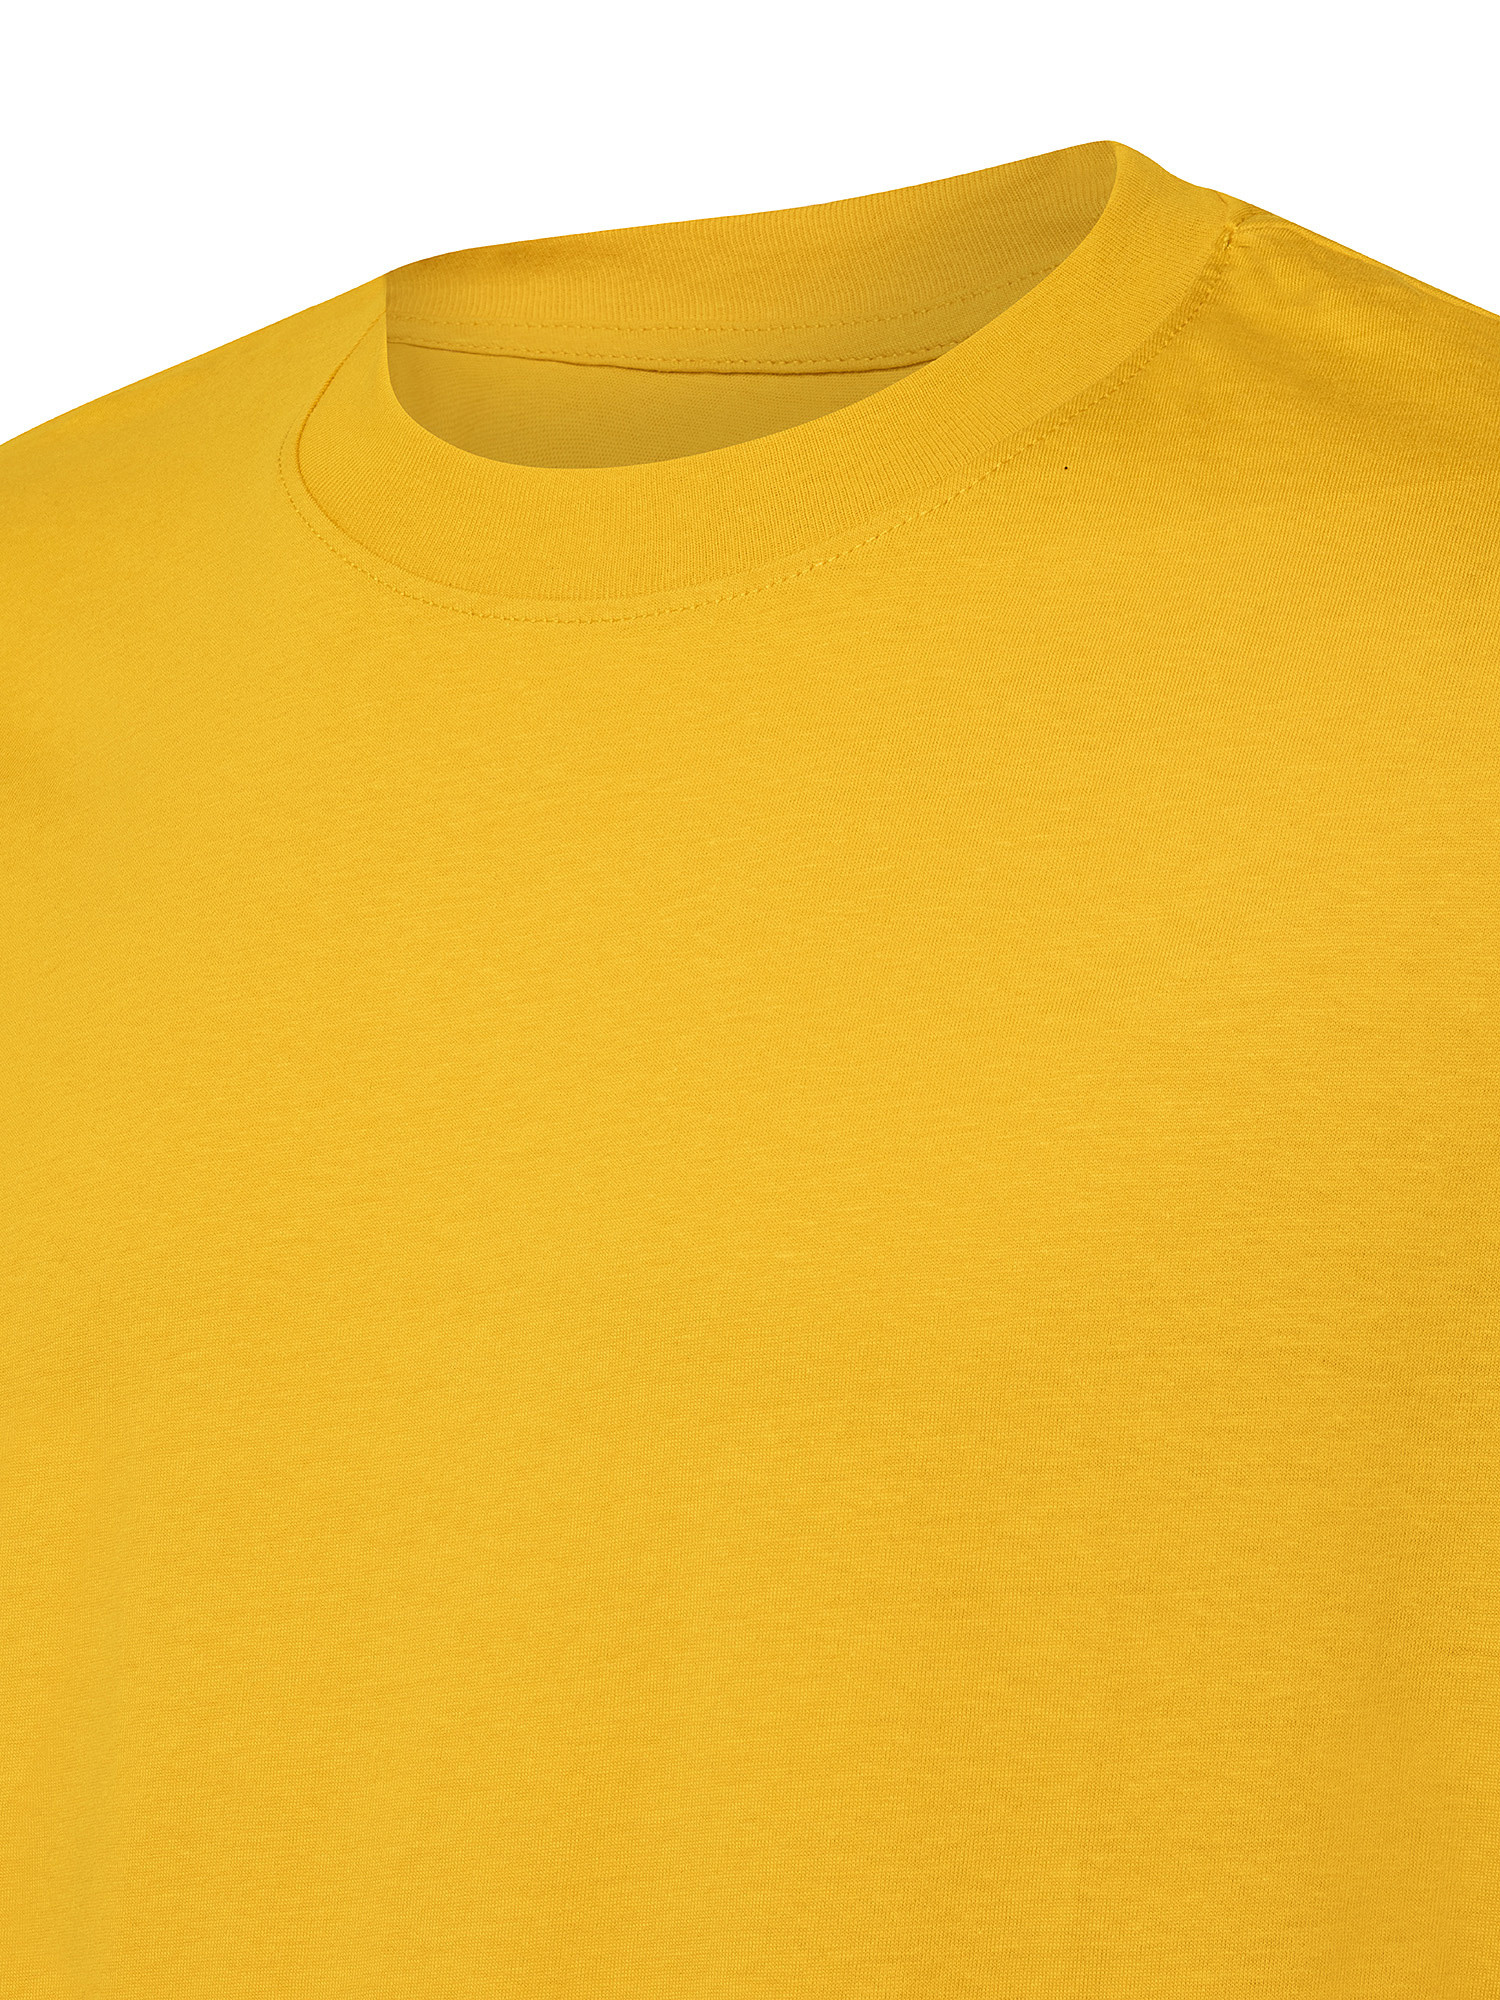 T-shirt in 100% cotton, Yellow, large image number 2